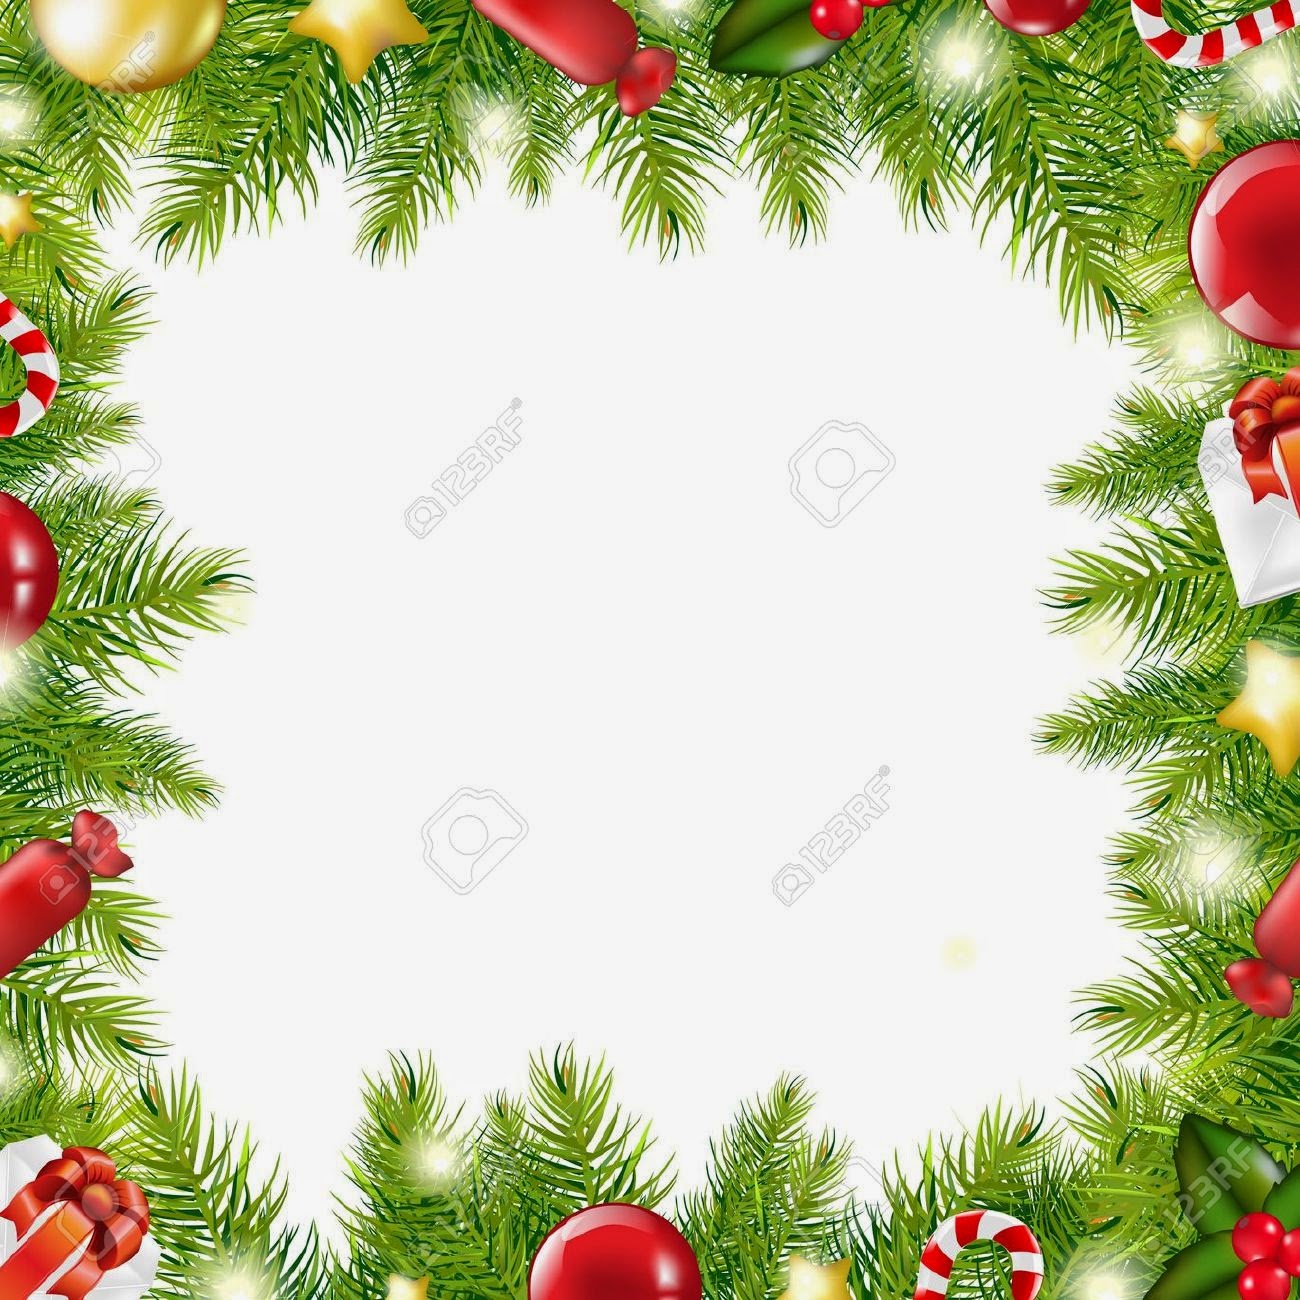 clipart christmas borders free downloads - photo #43